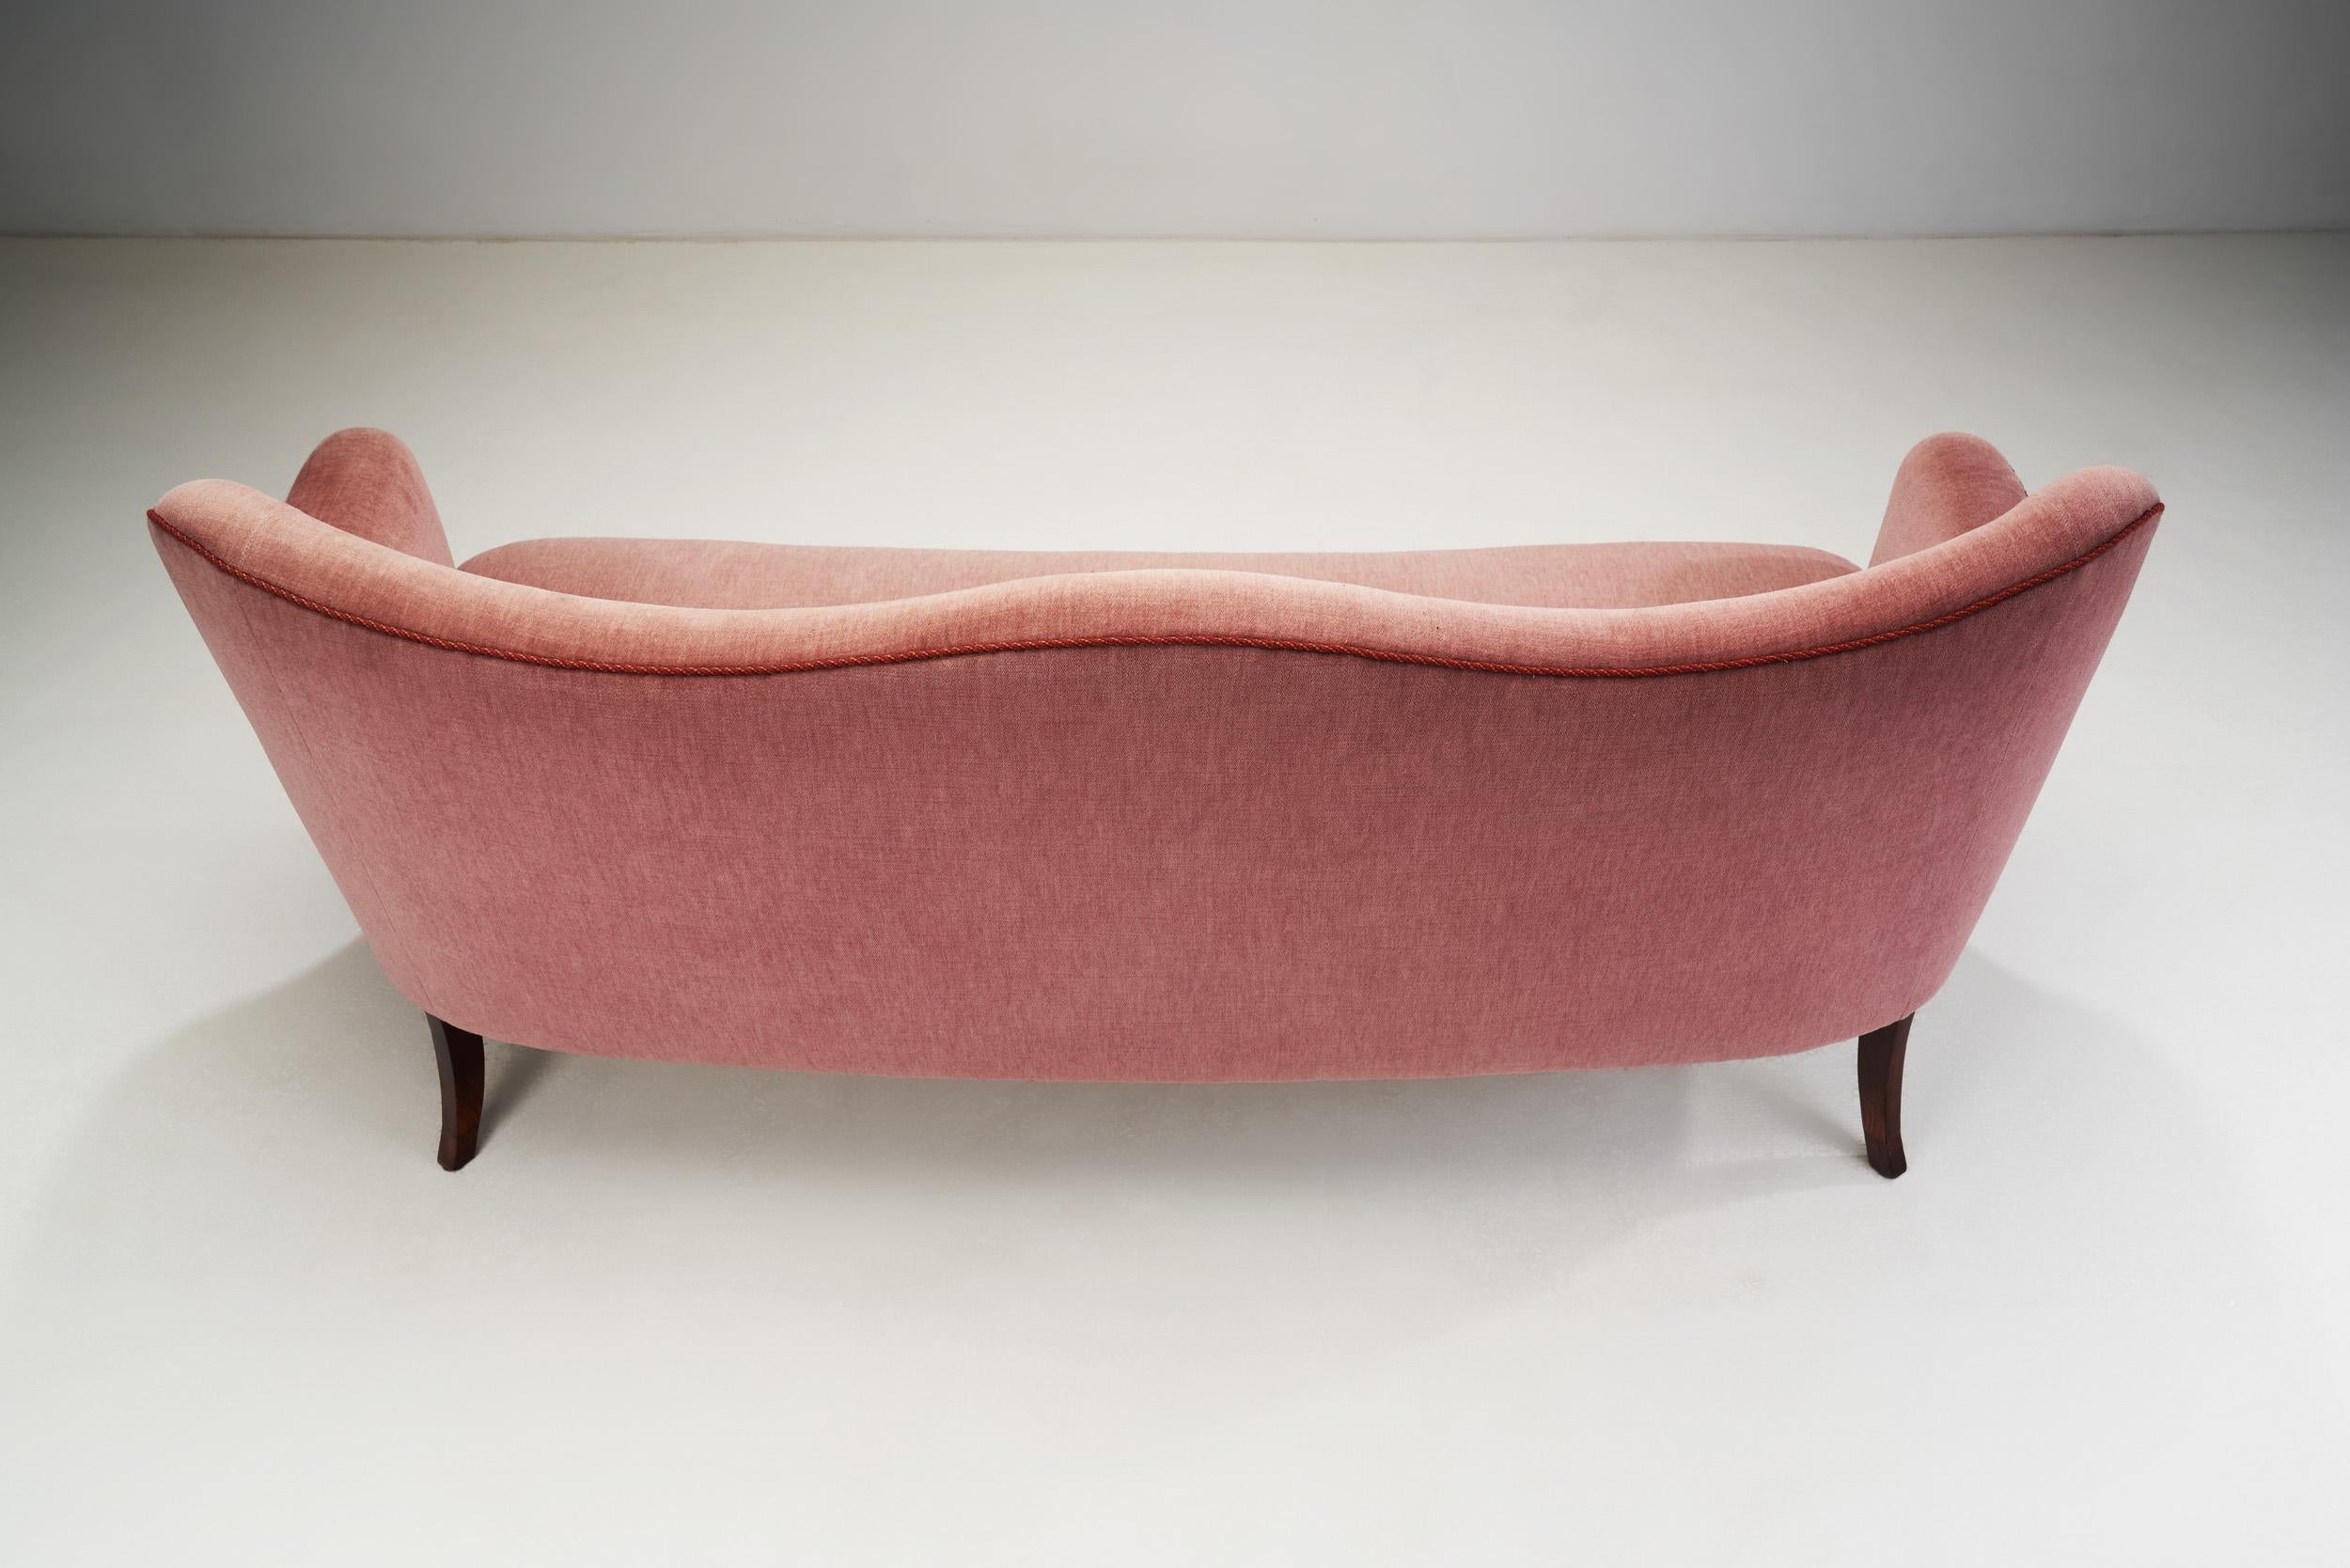 Fabric Danish Modern Three-Seater Sofa with Twisted Cord Trimming, Denmark, 1940s For Sale